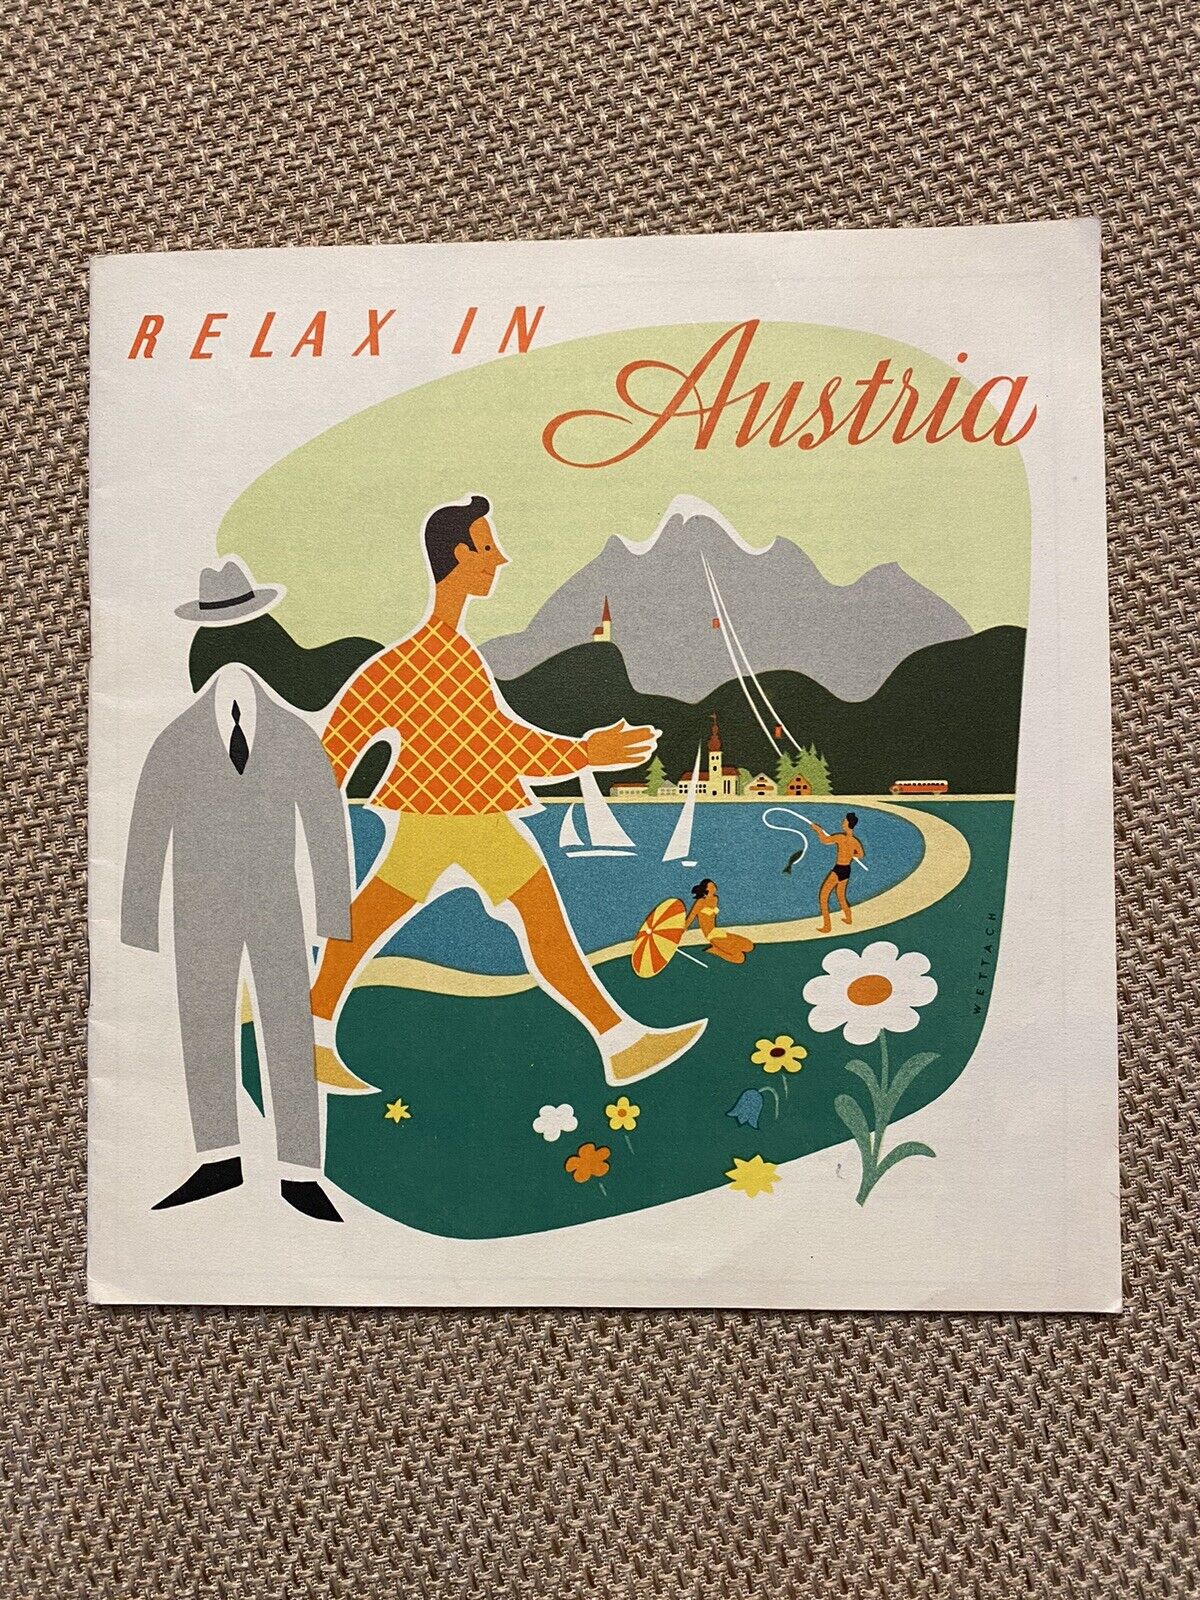 Vintage Travel Guide RELAX IN AUSTRIA Illustrations 1950s TOURISM Map Outdoors